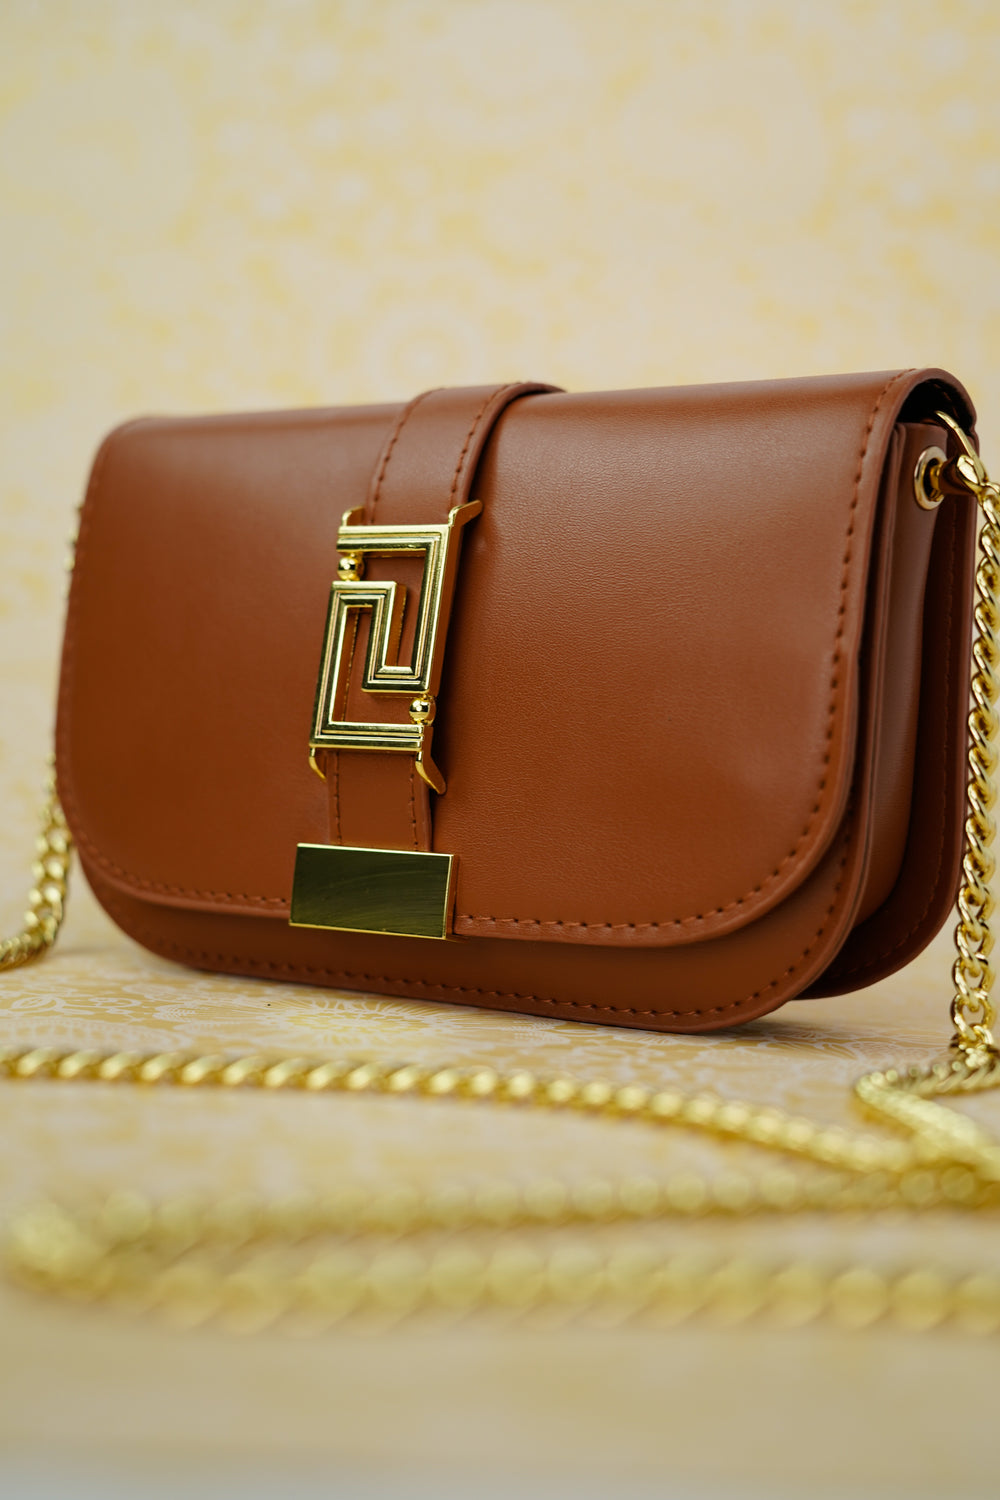 Fashionably Styled Belted Hip Bag Featuring Charming Rustic Rose Detail